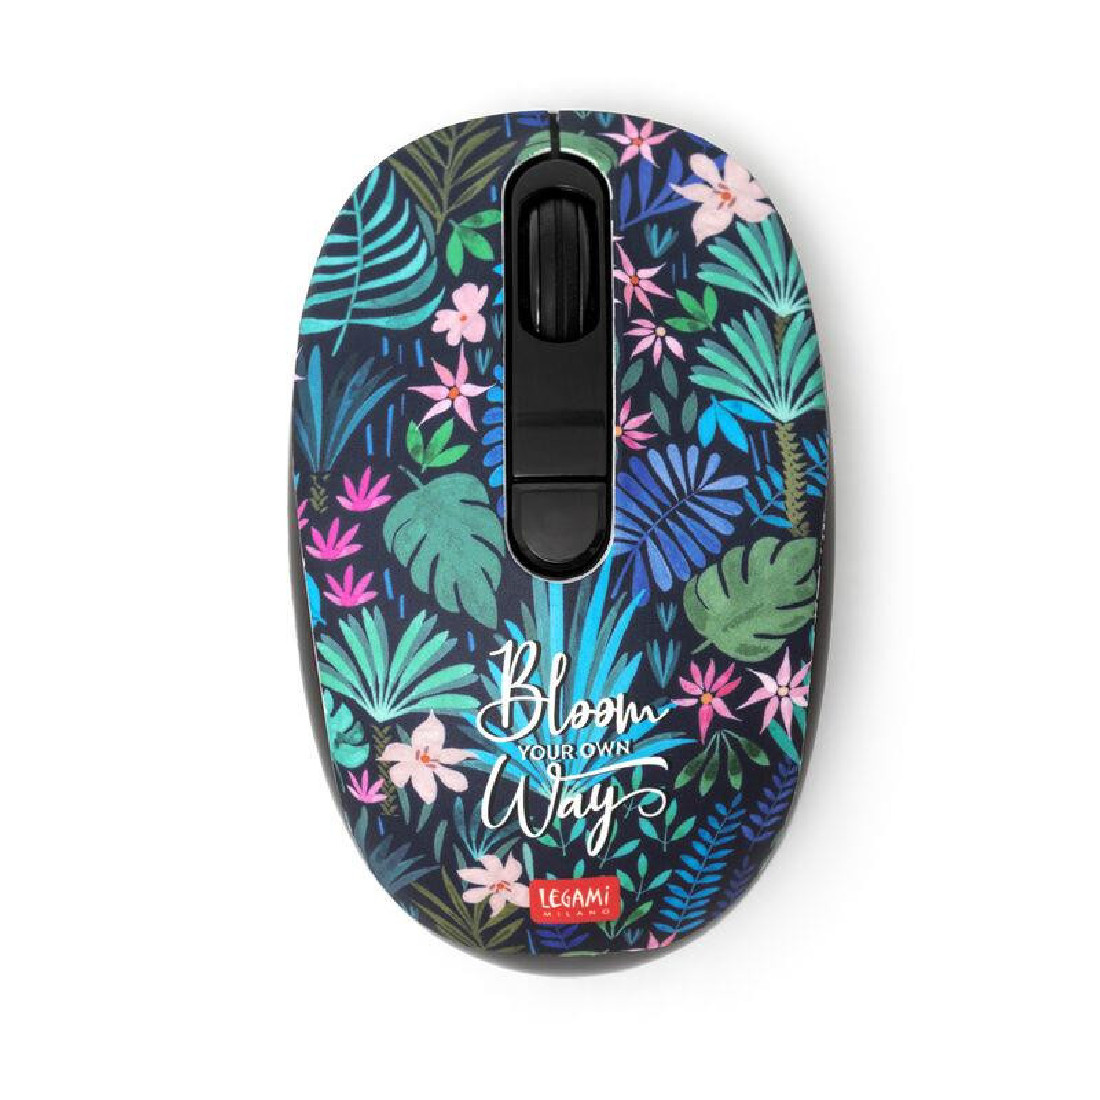 WIRELESS MOUSE  BLOOM YOUR OWN WAYS  LEGAMI